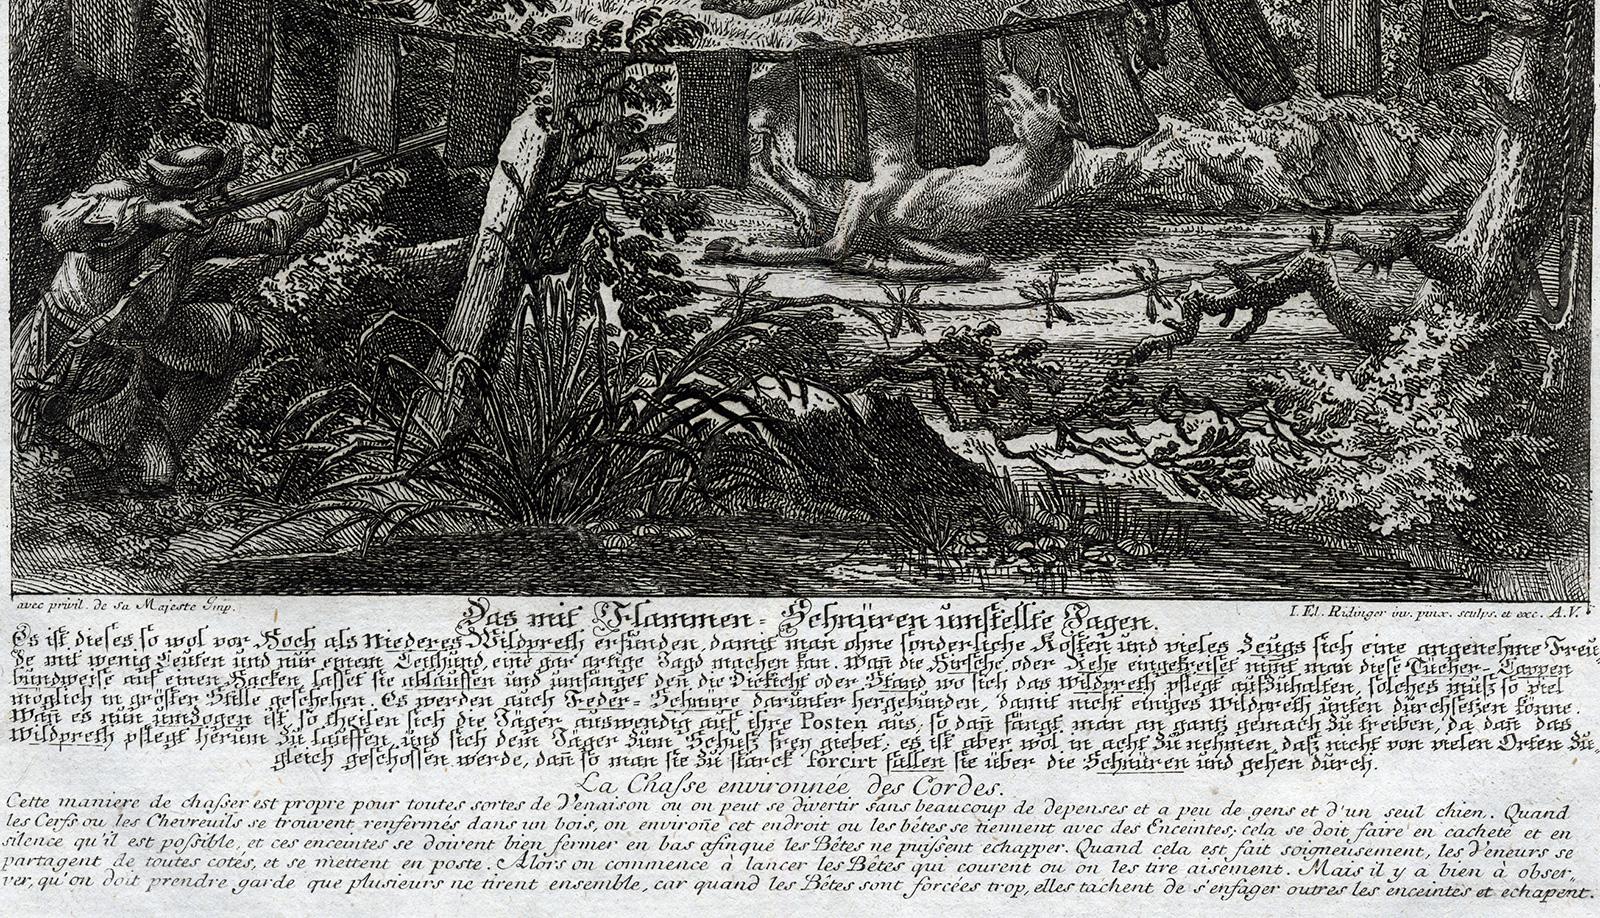 Antique hunting scene print with a deer trap by Ridinger - Engraving - 18th c - Old Masters Print by Martin Elias Ridinger